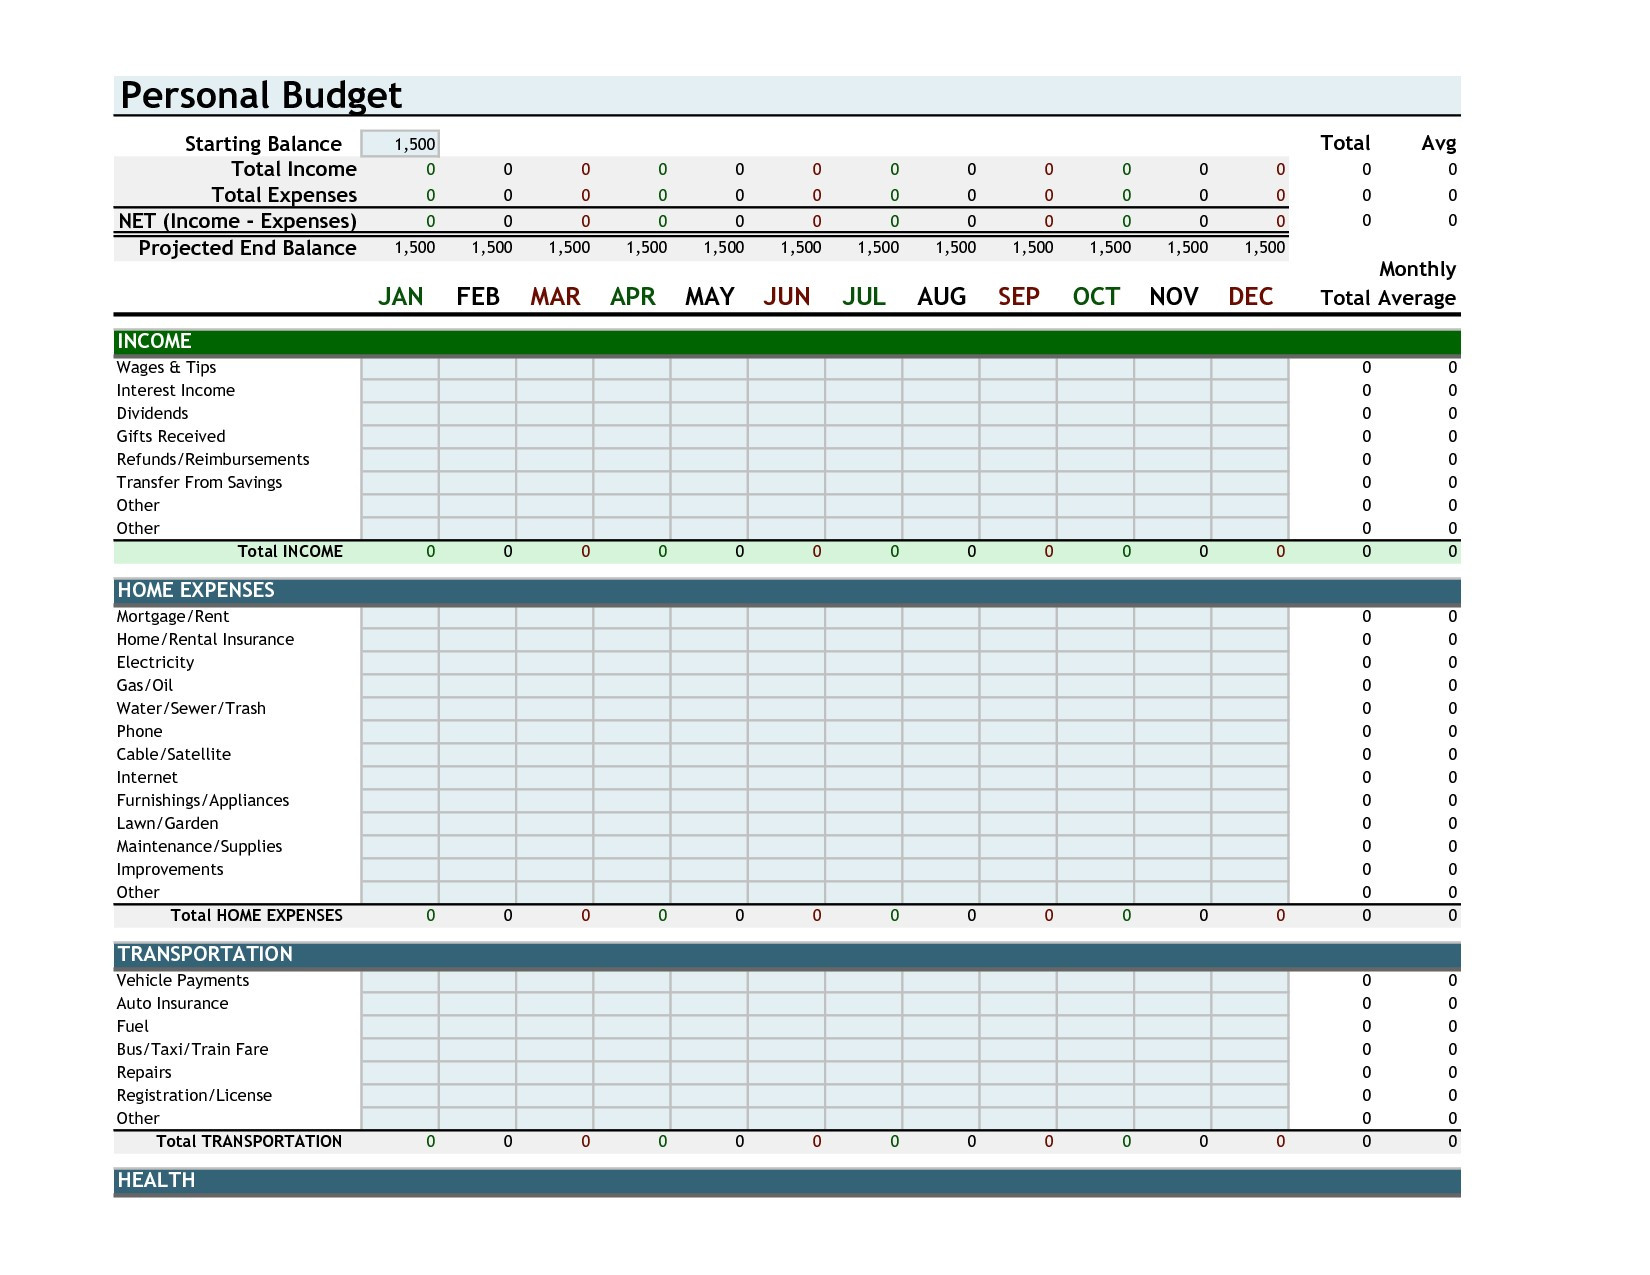 personal budget planning software